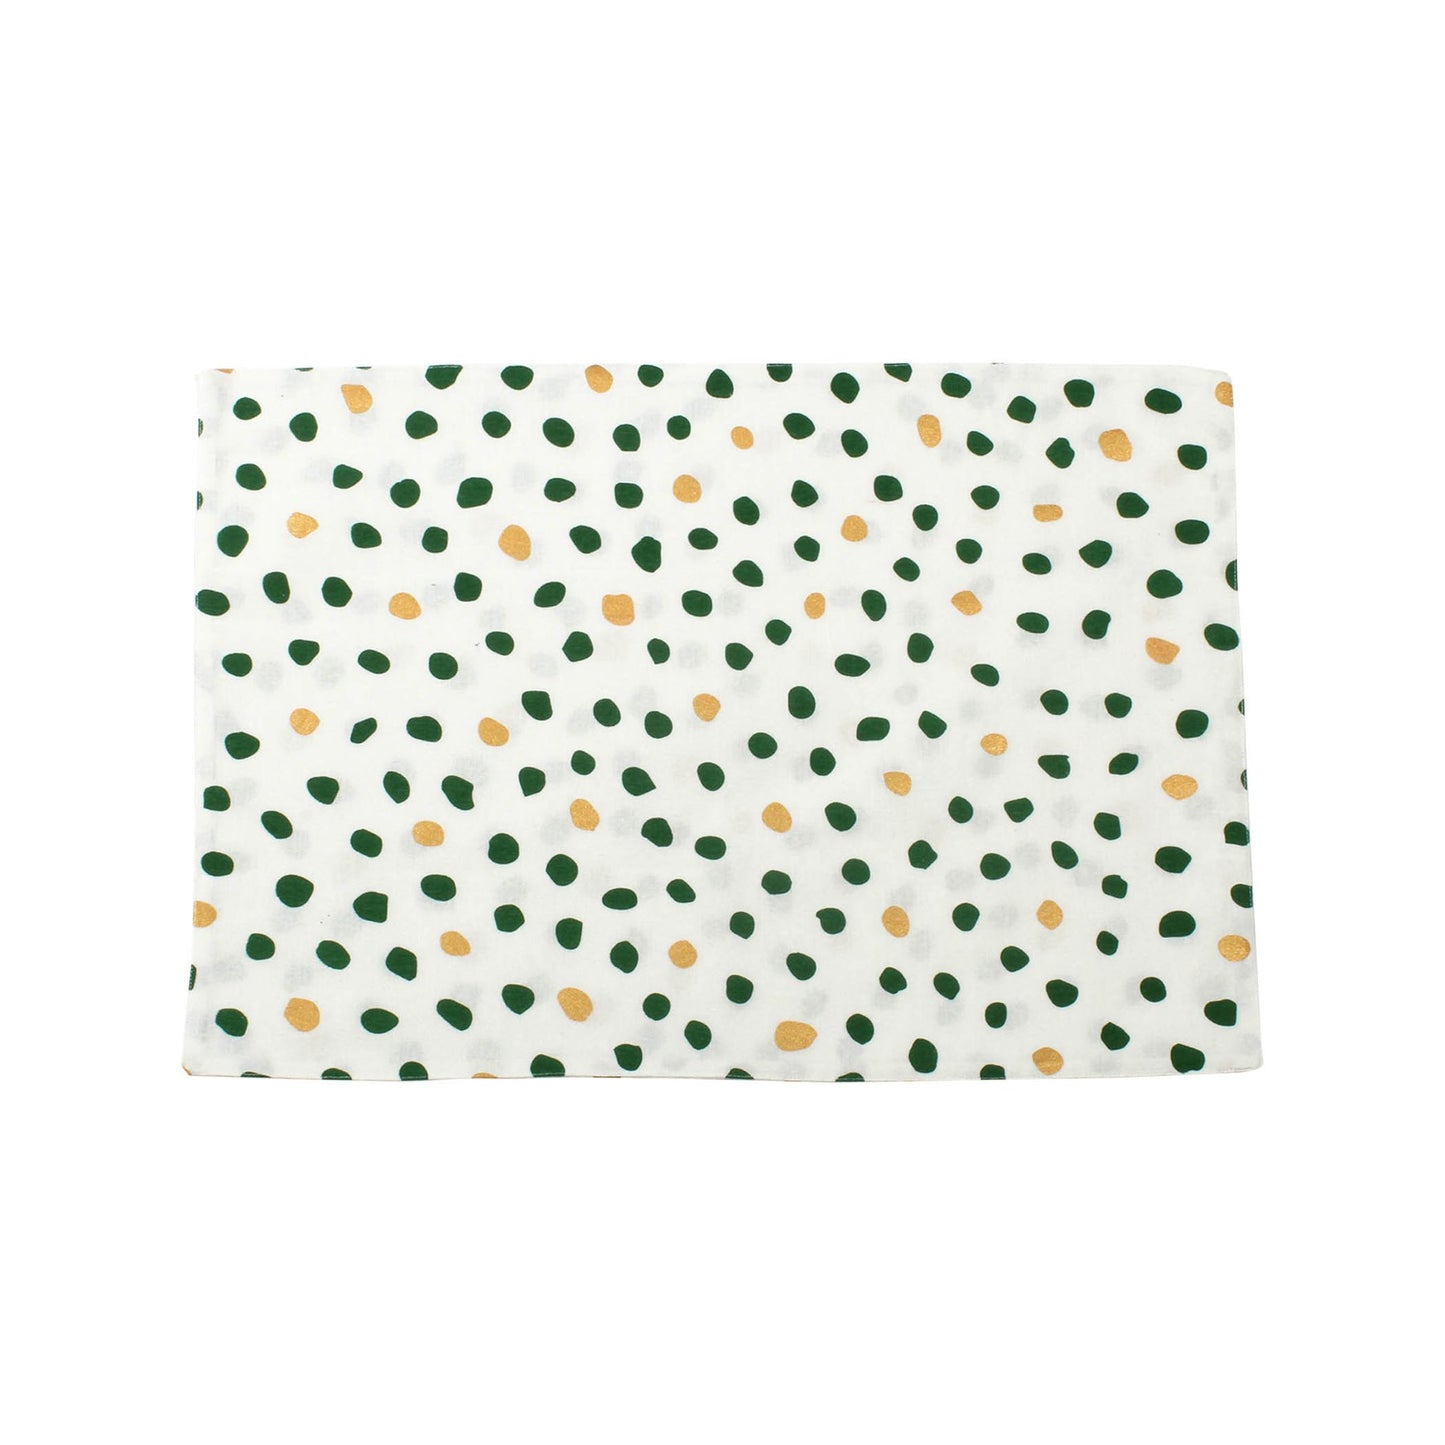 Vietri Bohemian Linen Reversible Placemats, Green and Gold, Set of 4